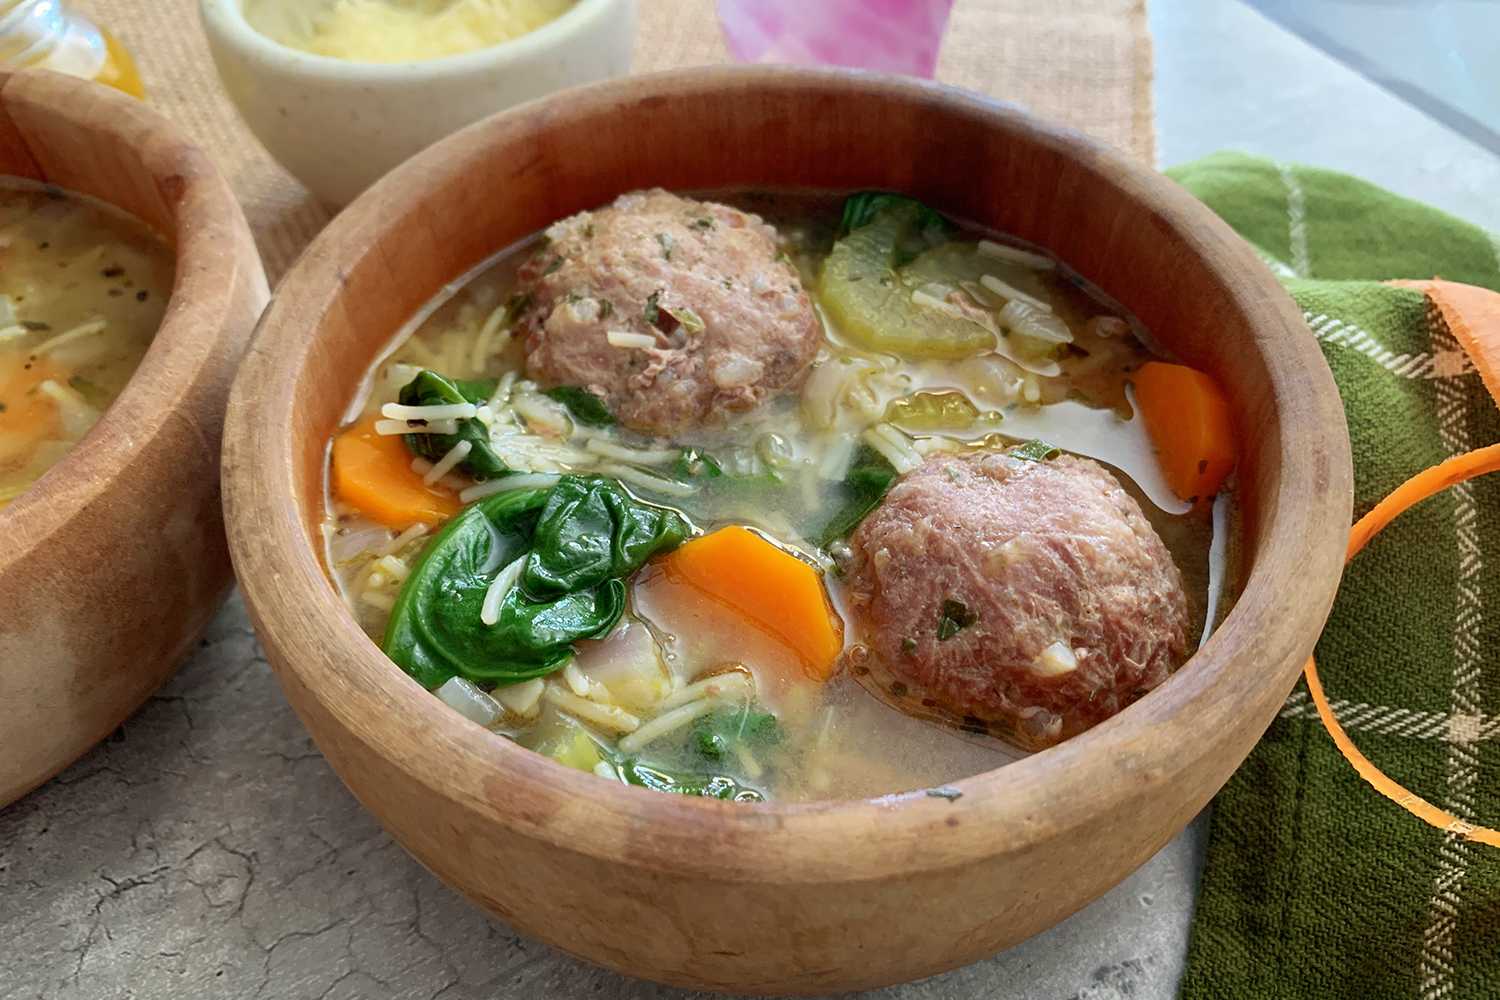 Clear soup filled with meatballs, carrot, spinach, celery and noodles